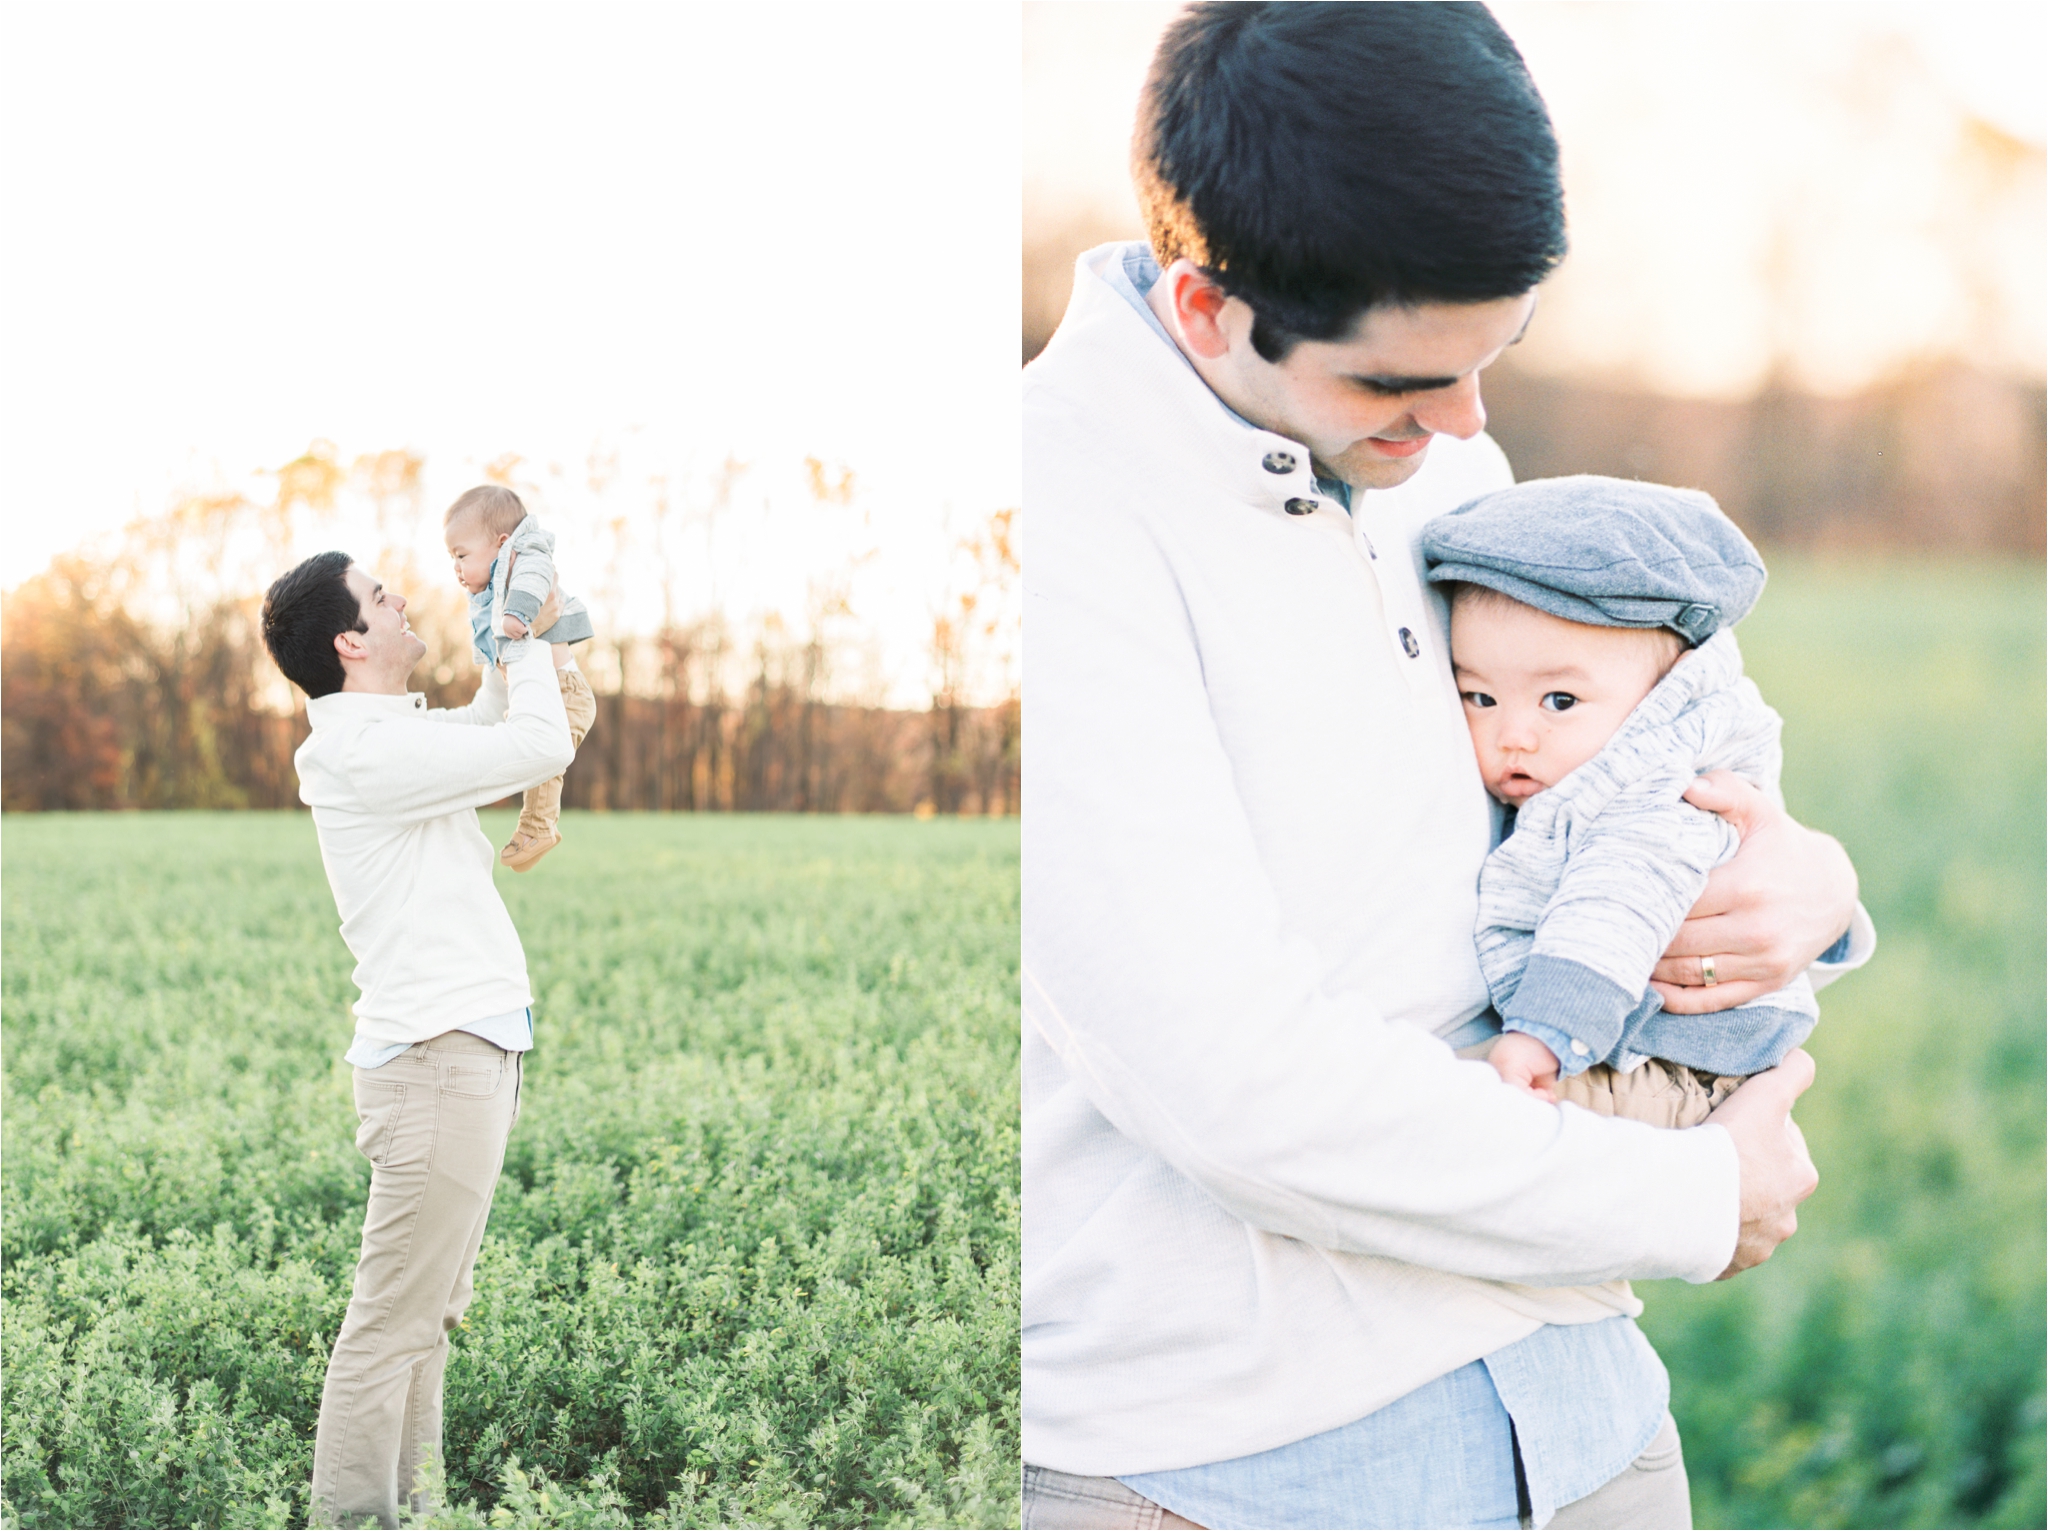 Golden Hour Family Session in Hershey, PA by Hillary Muelleck Photography // hillarymuelleck.com